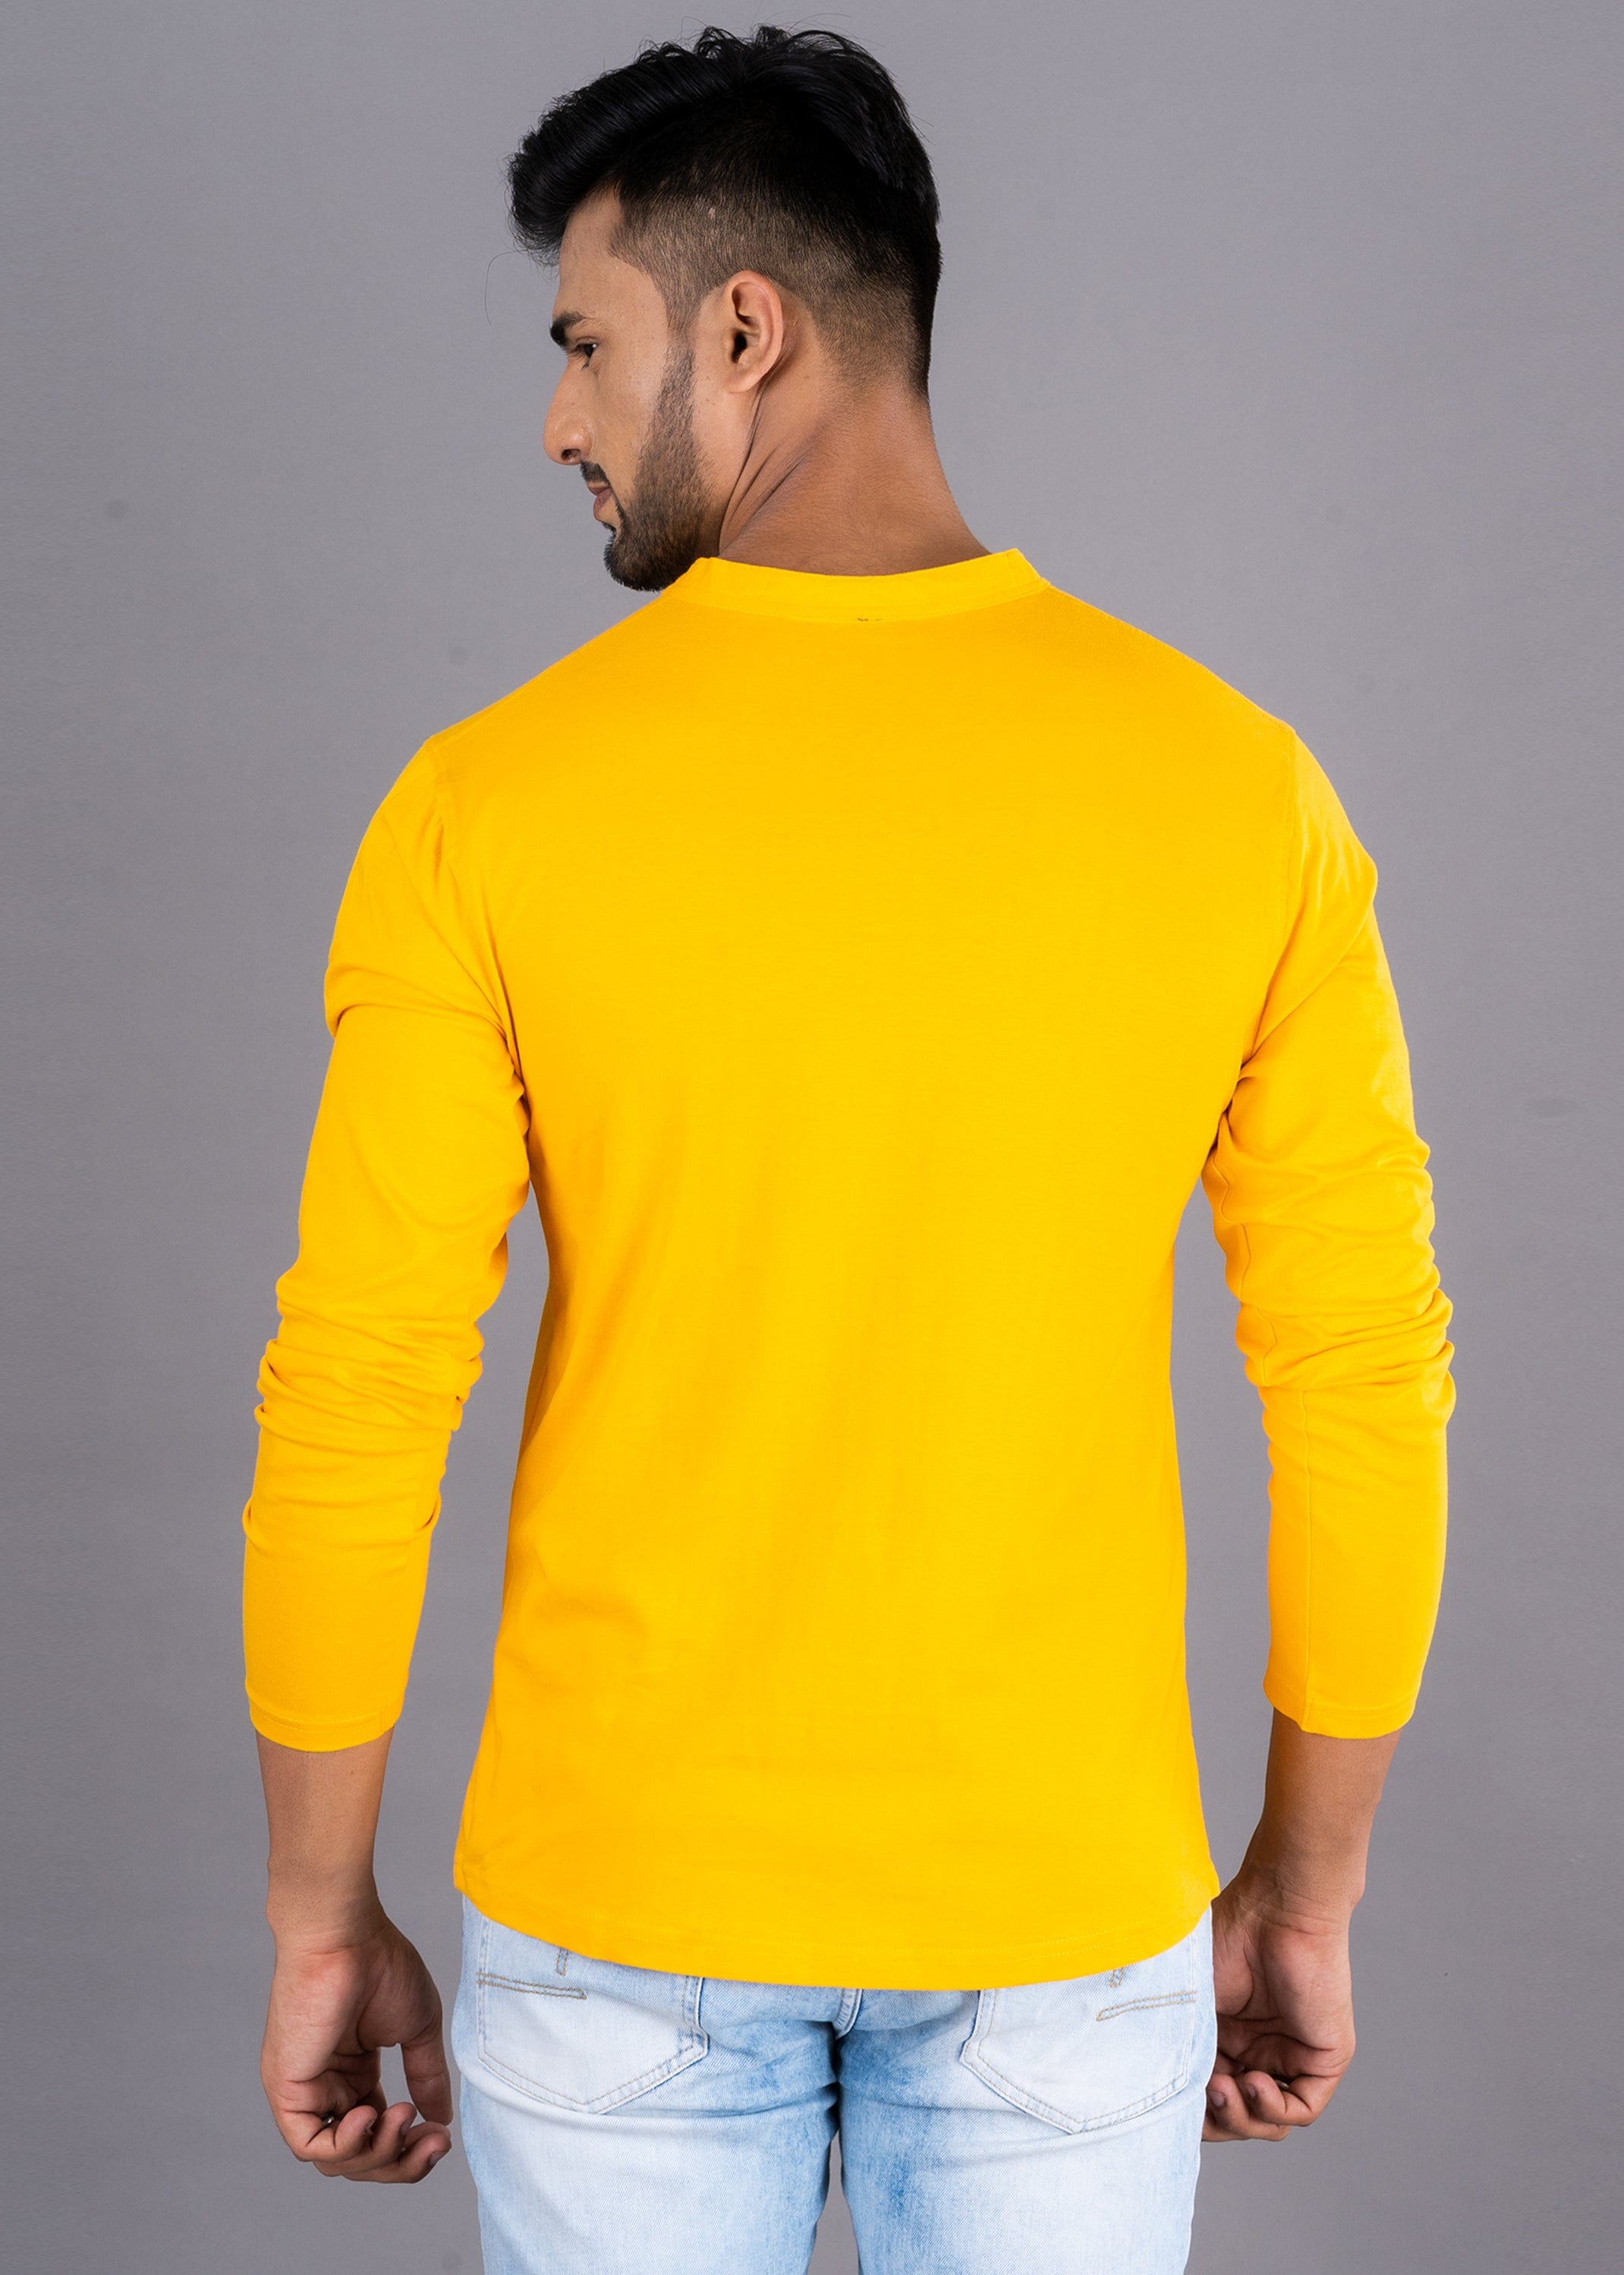 Solid Full Sleeve Premium Cotton Henley T-shirt For Men - Yellow